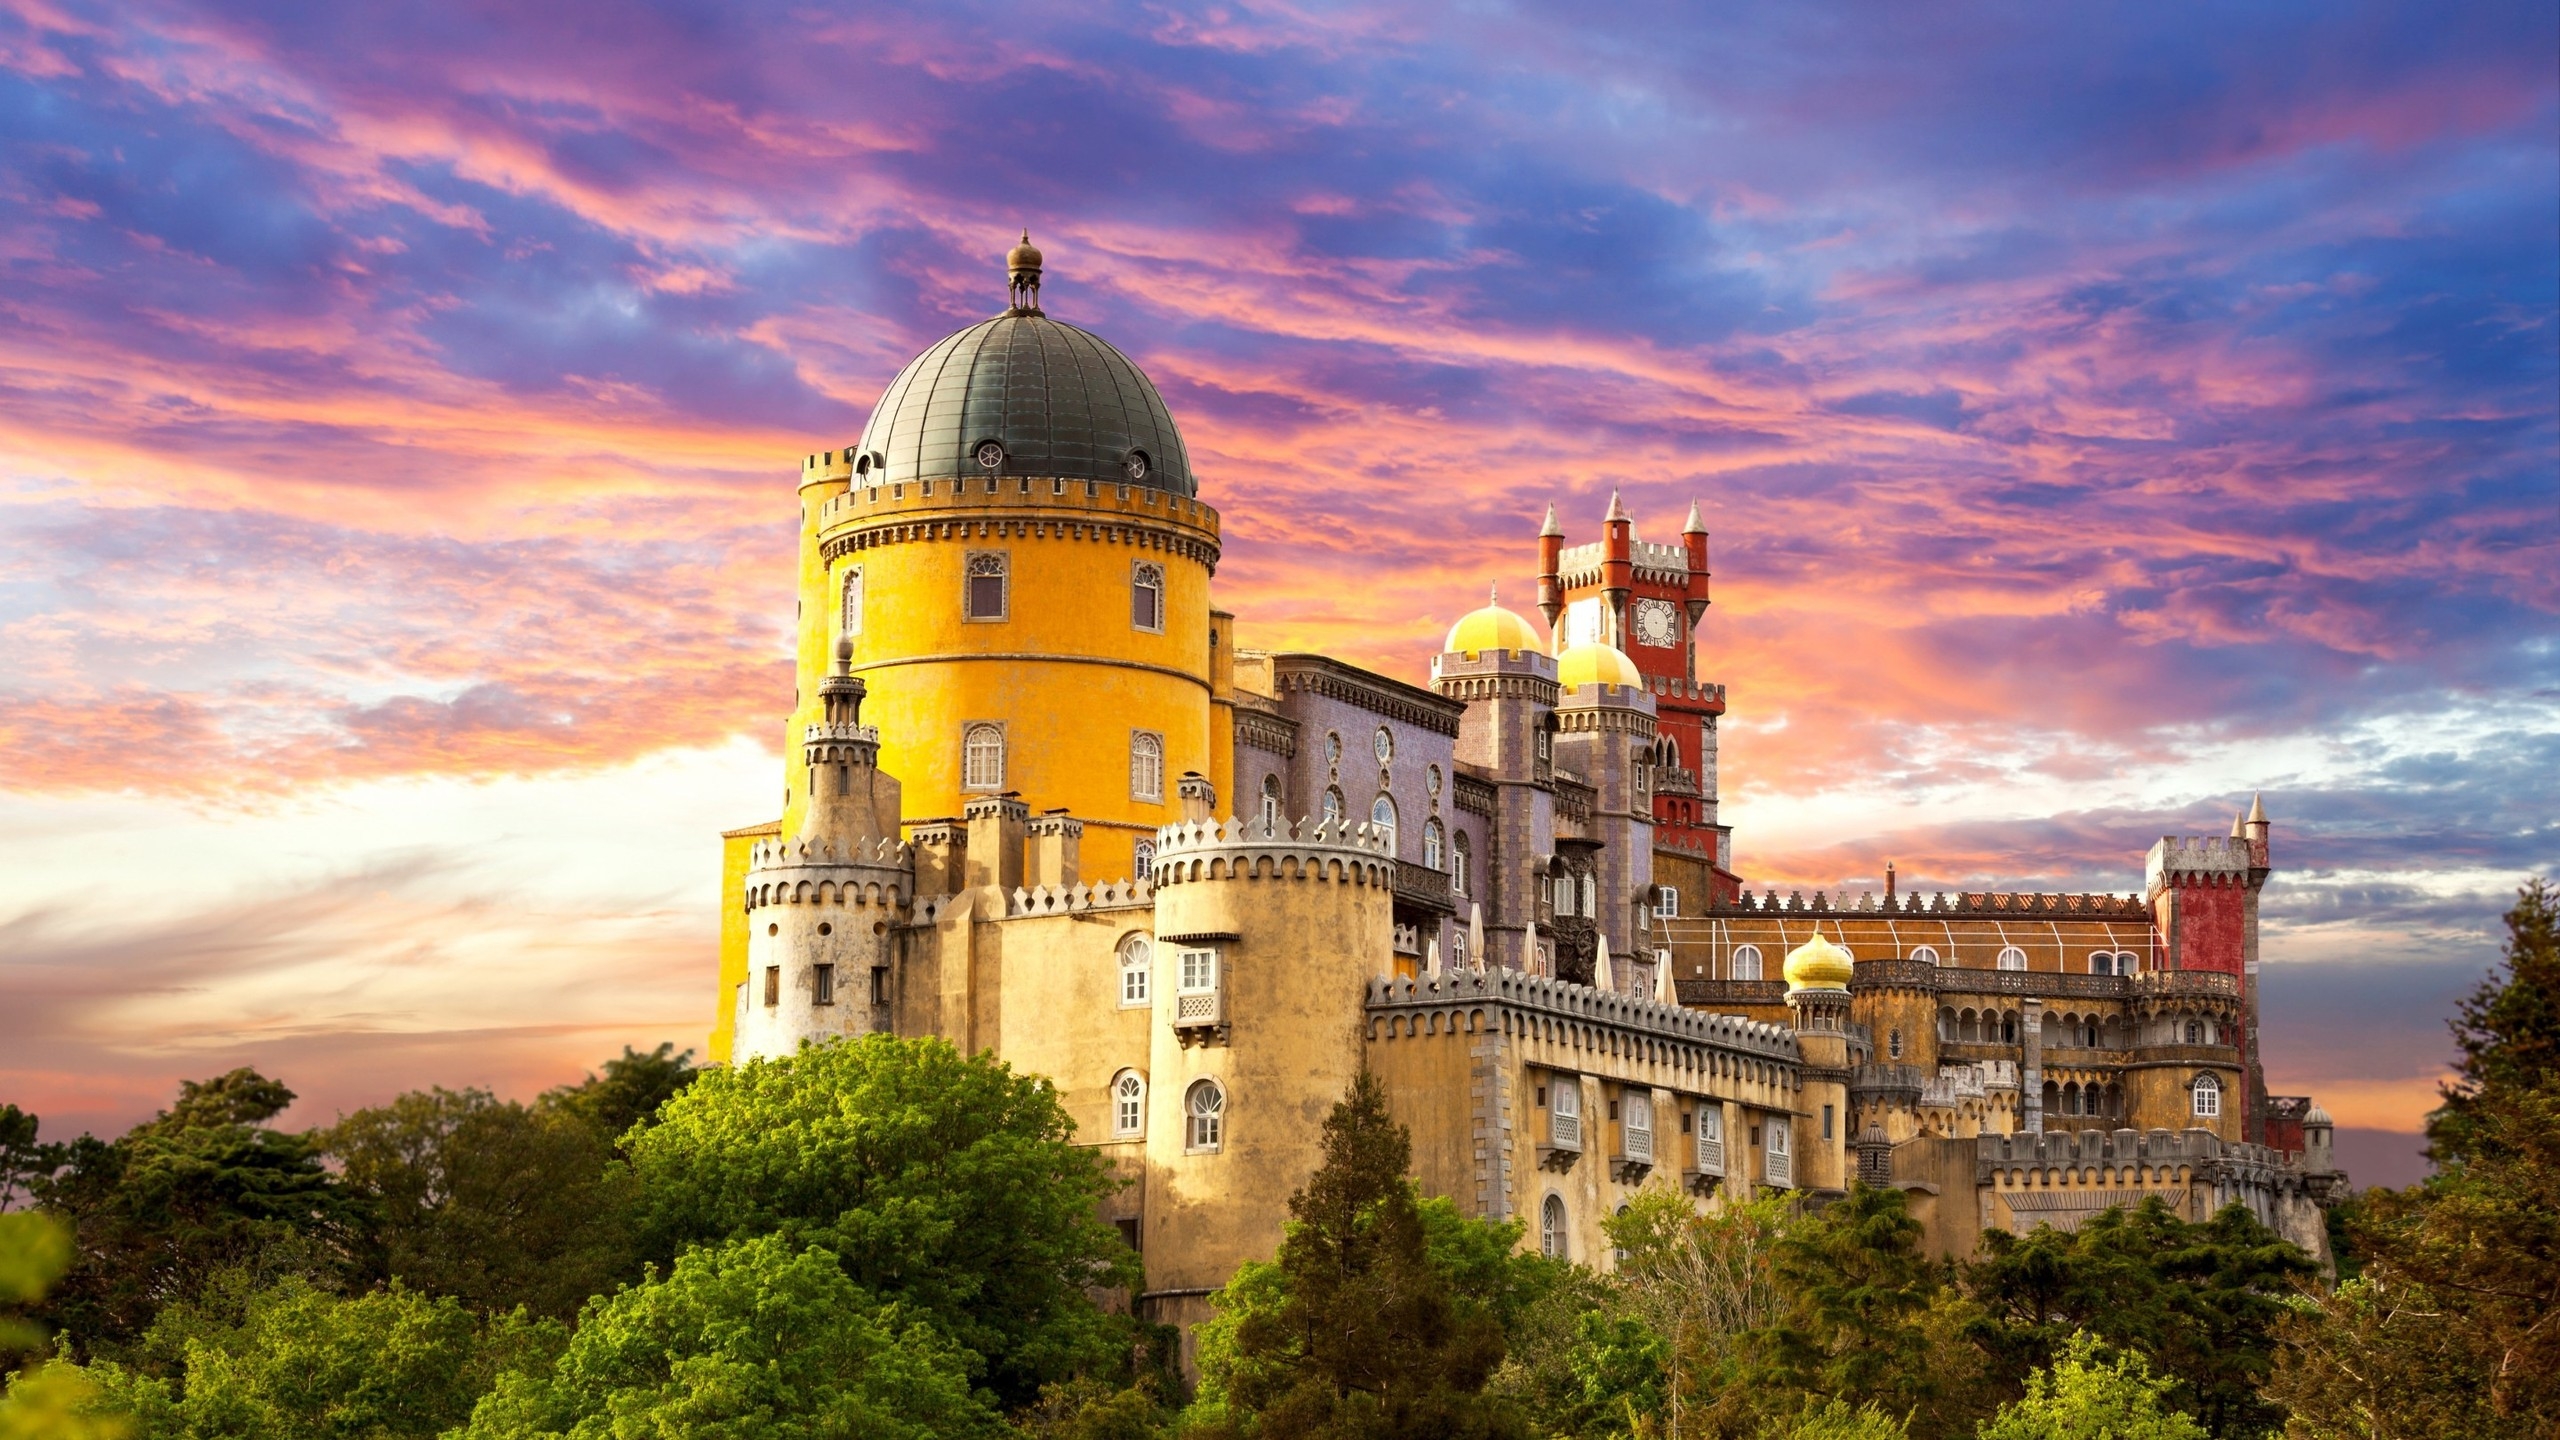 Pena National Palace Portugal for 2560x1440 HDTV resolution